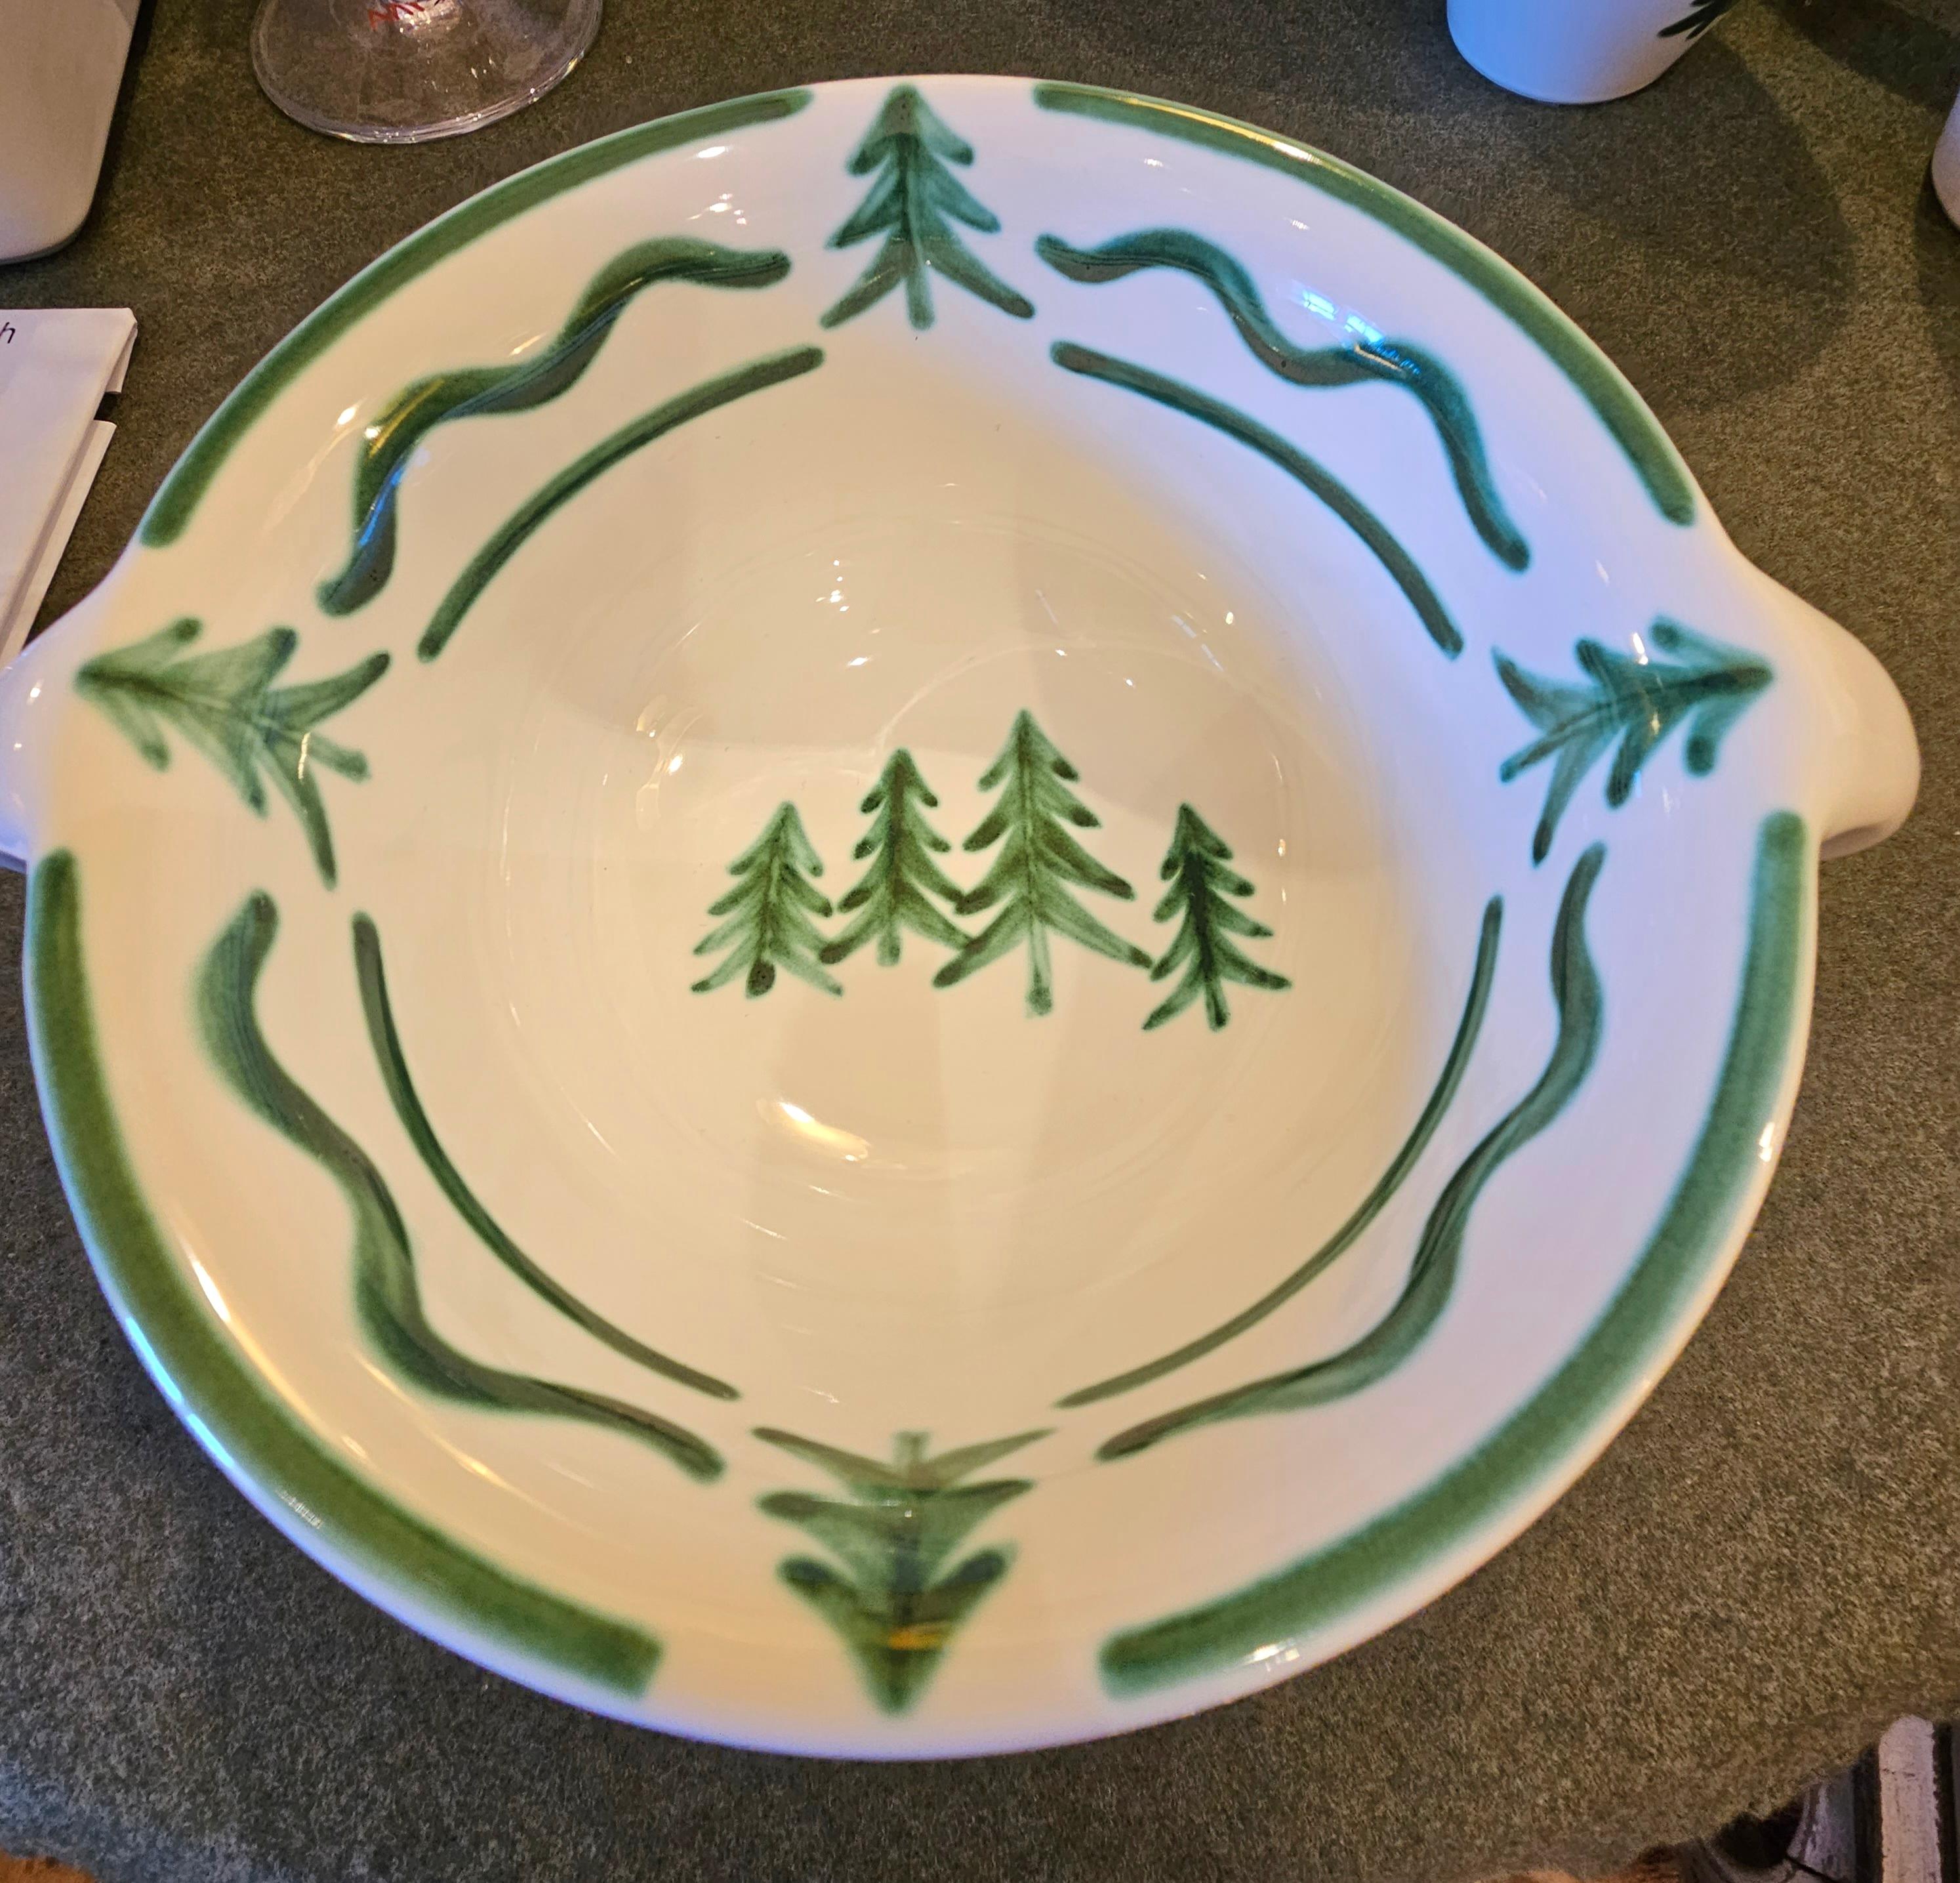 Hands-free painted round pottery dish from Austria in Black Forest style. Decorated with a hand-painted tree decor in green all around. Showing trees in the bottom and a handpainted green garland around. Produced in Austria in the typical Austrian